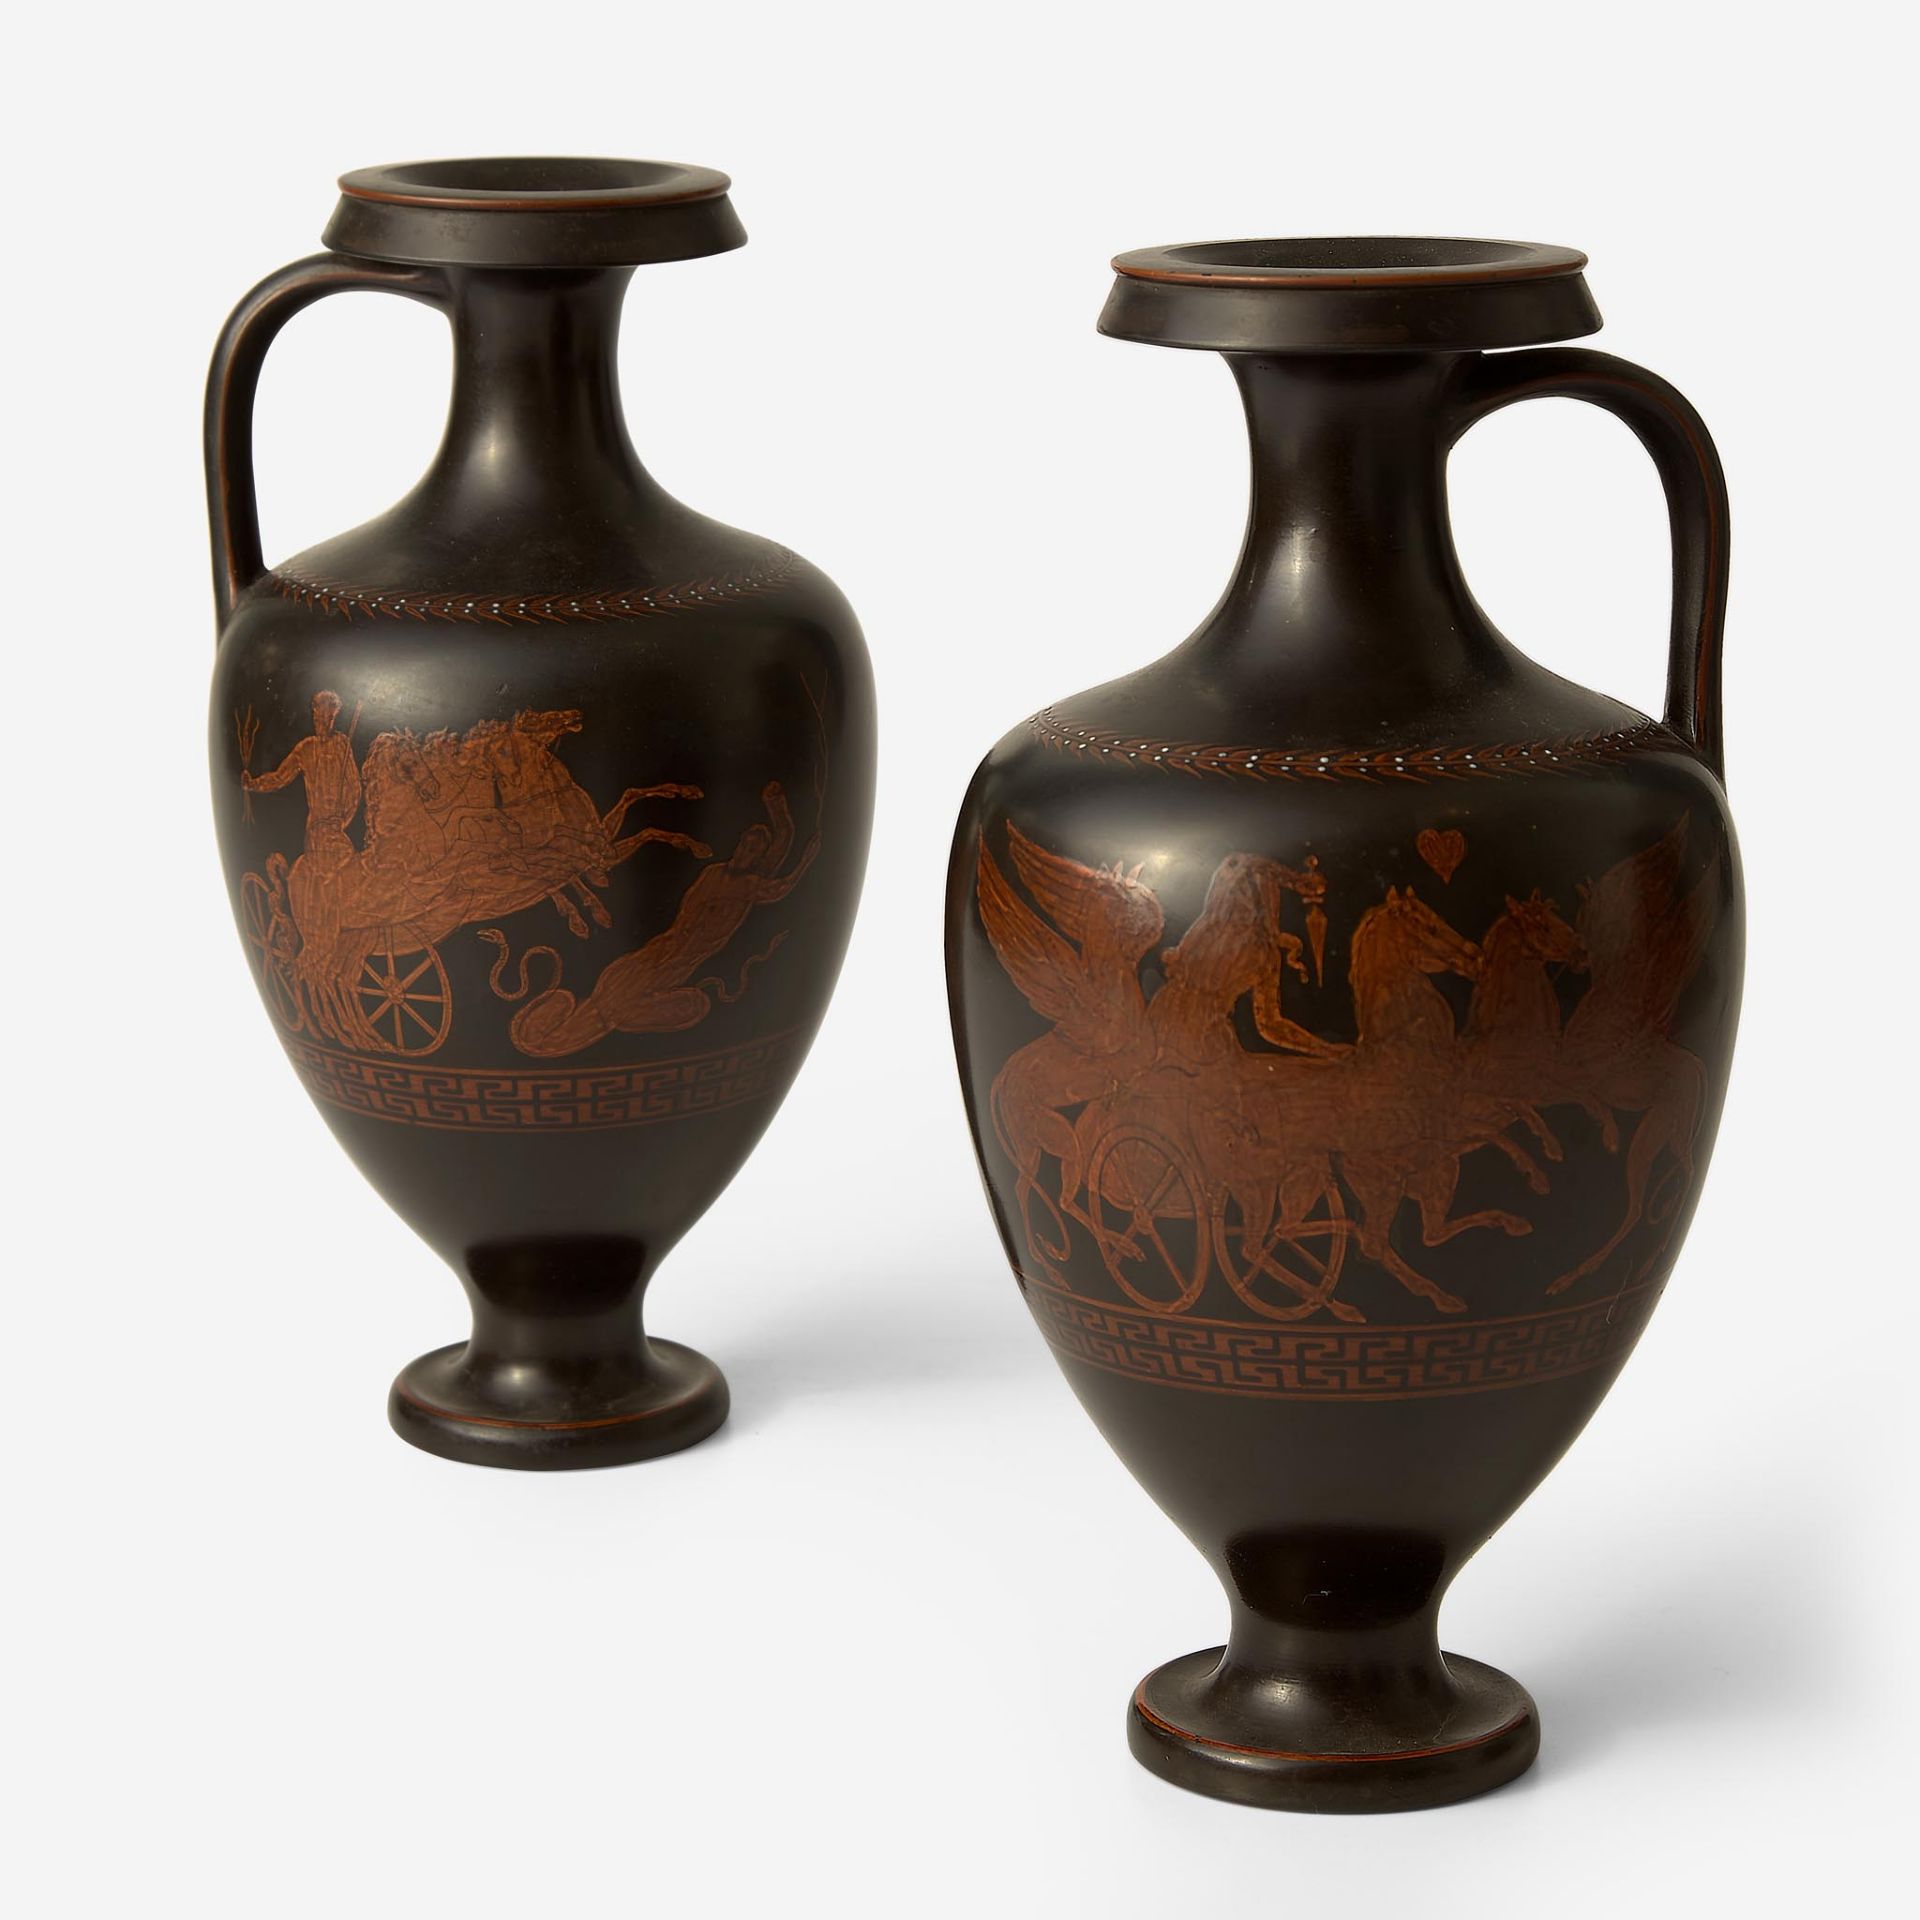 A Pair of Wedgwood Black Basalt Handled Vases with Red Figure Decoration UK, circa 1860 - Image 2 of 3